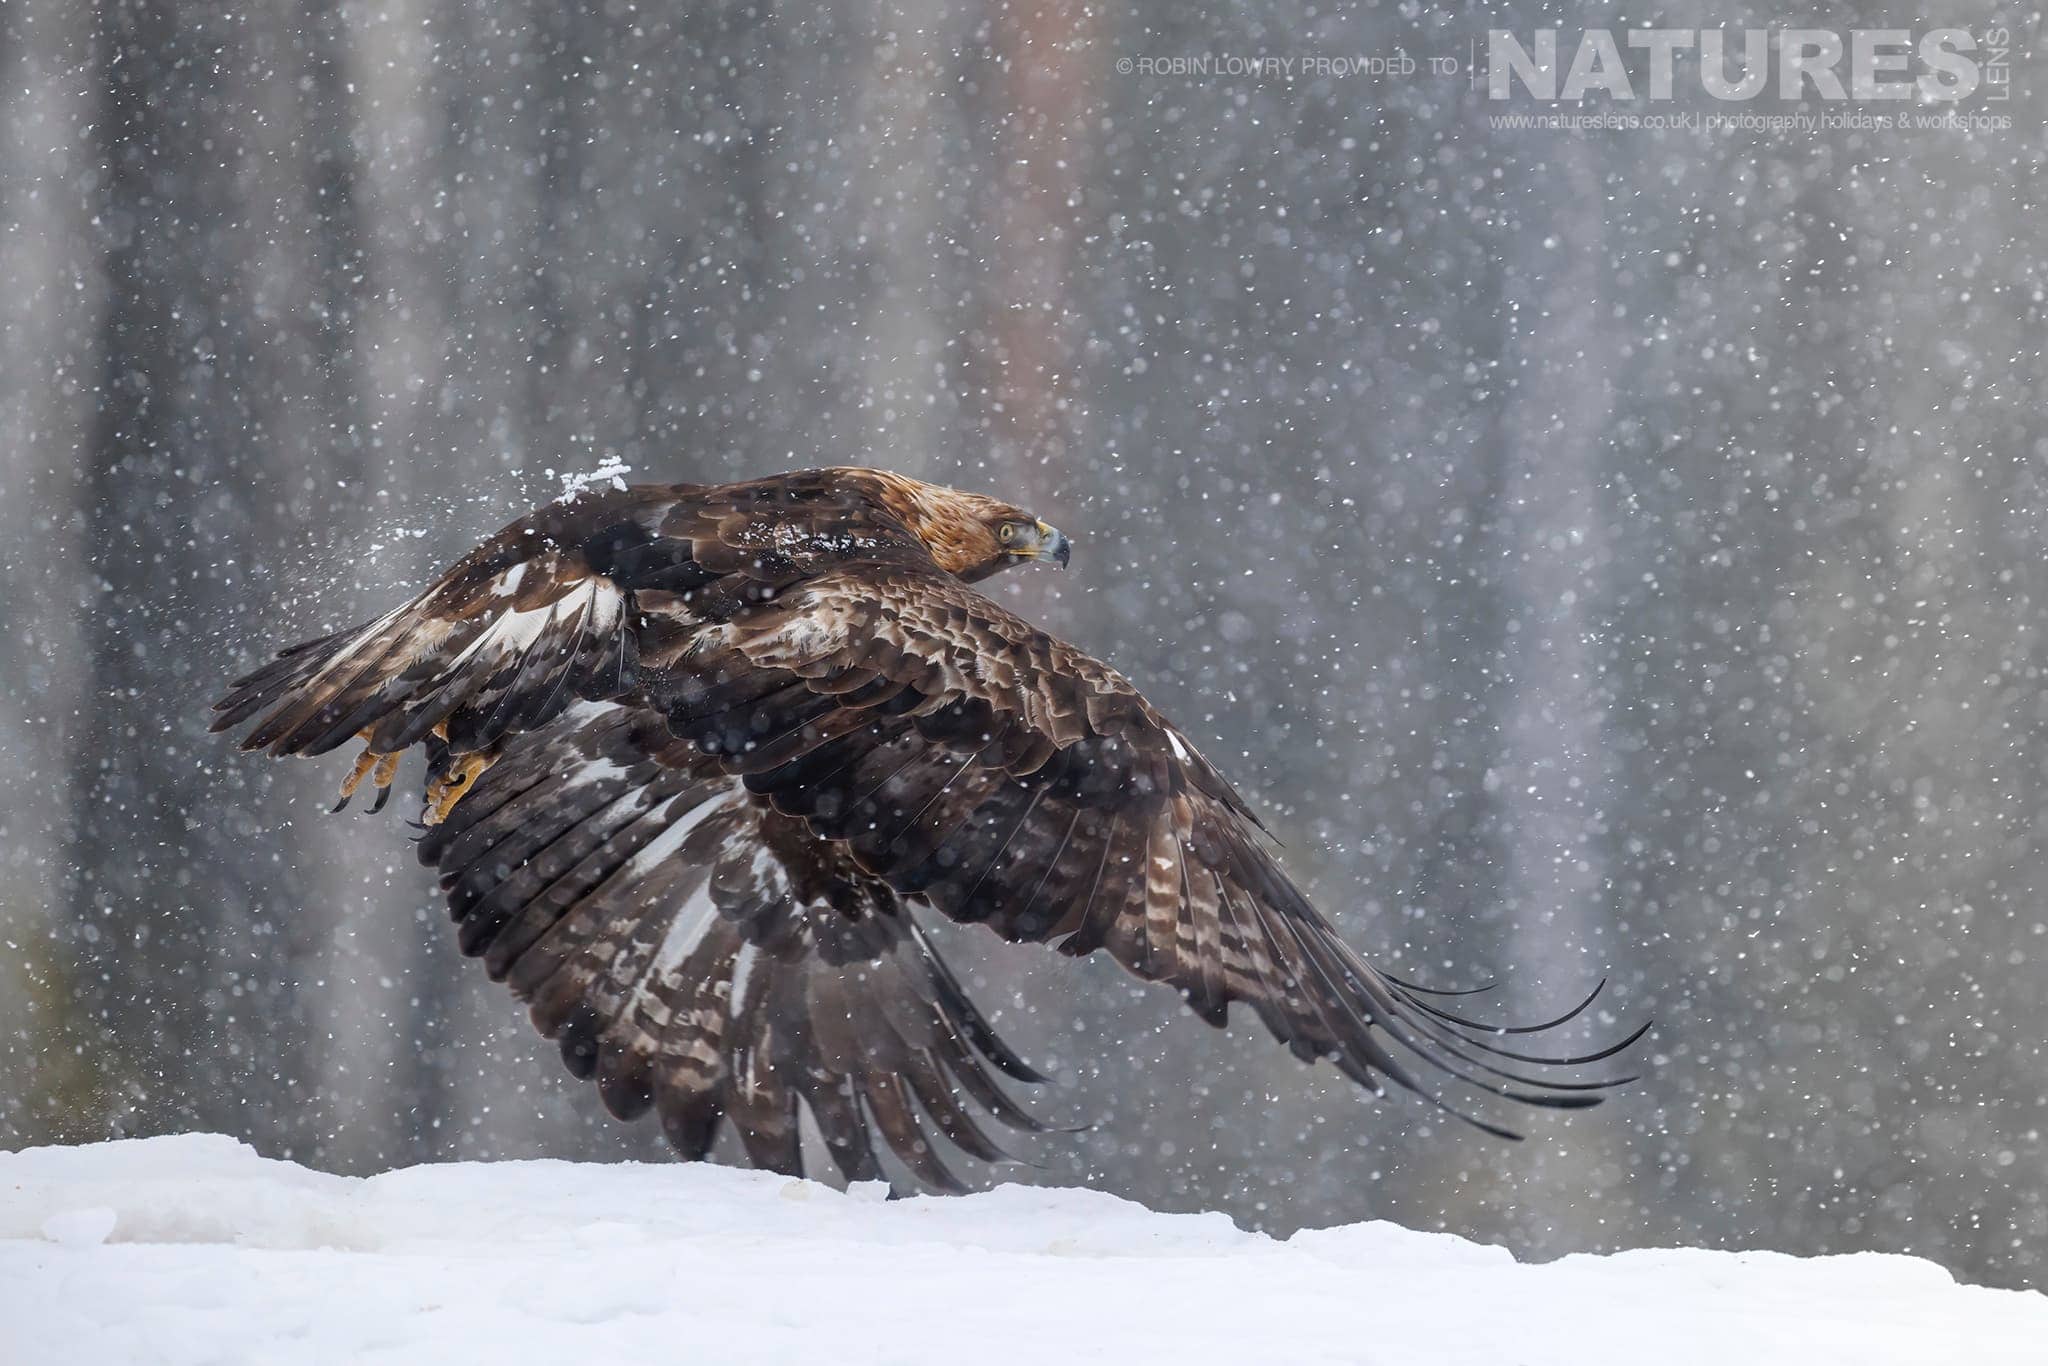 A Golden Eagle Flying During Snow Storm Photographed During A Natureslens Photography Holiday To Photograph Northern Sweden'S Eagles In Winter